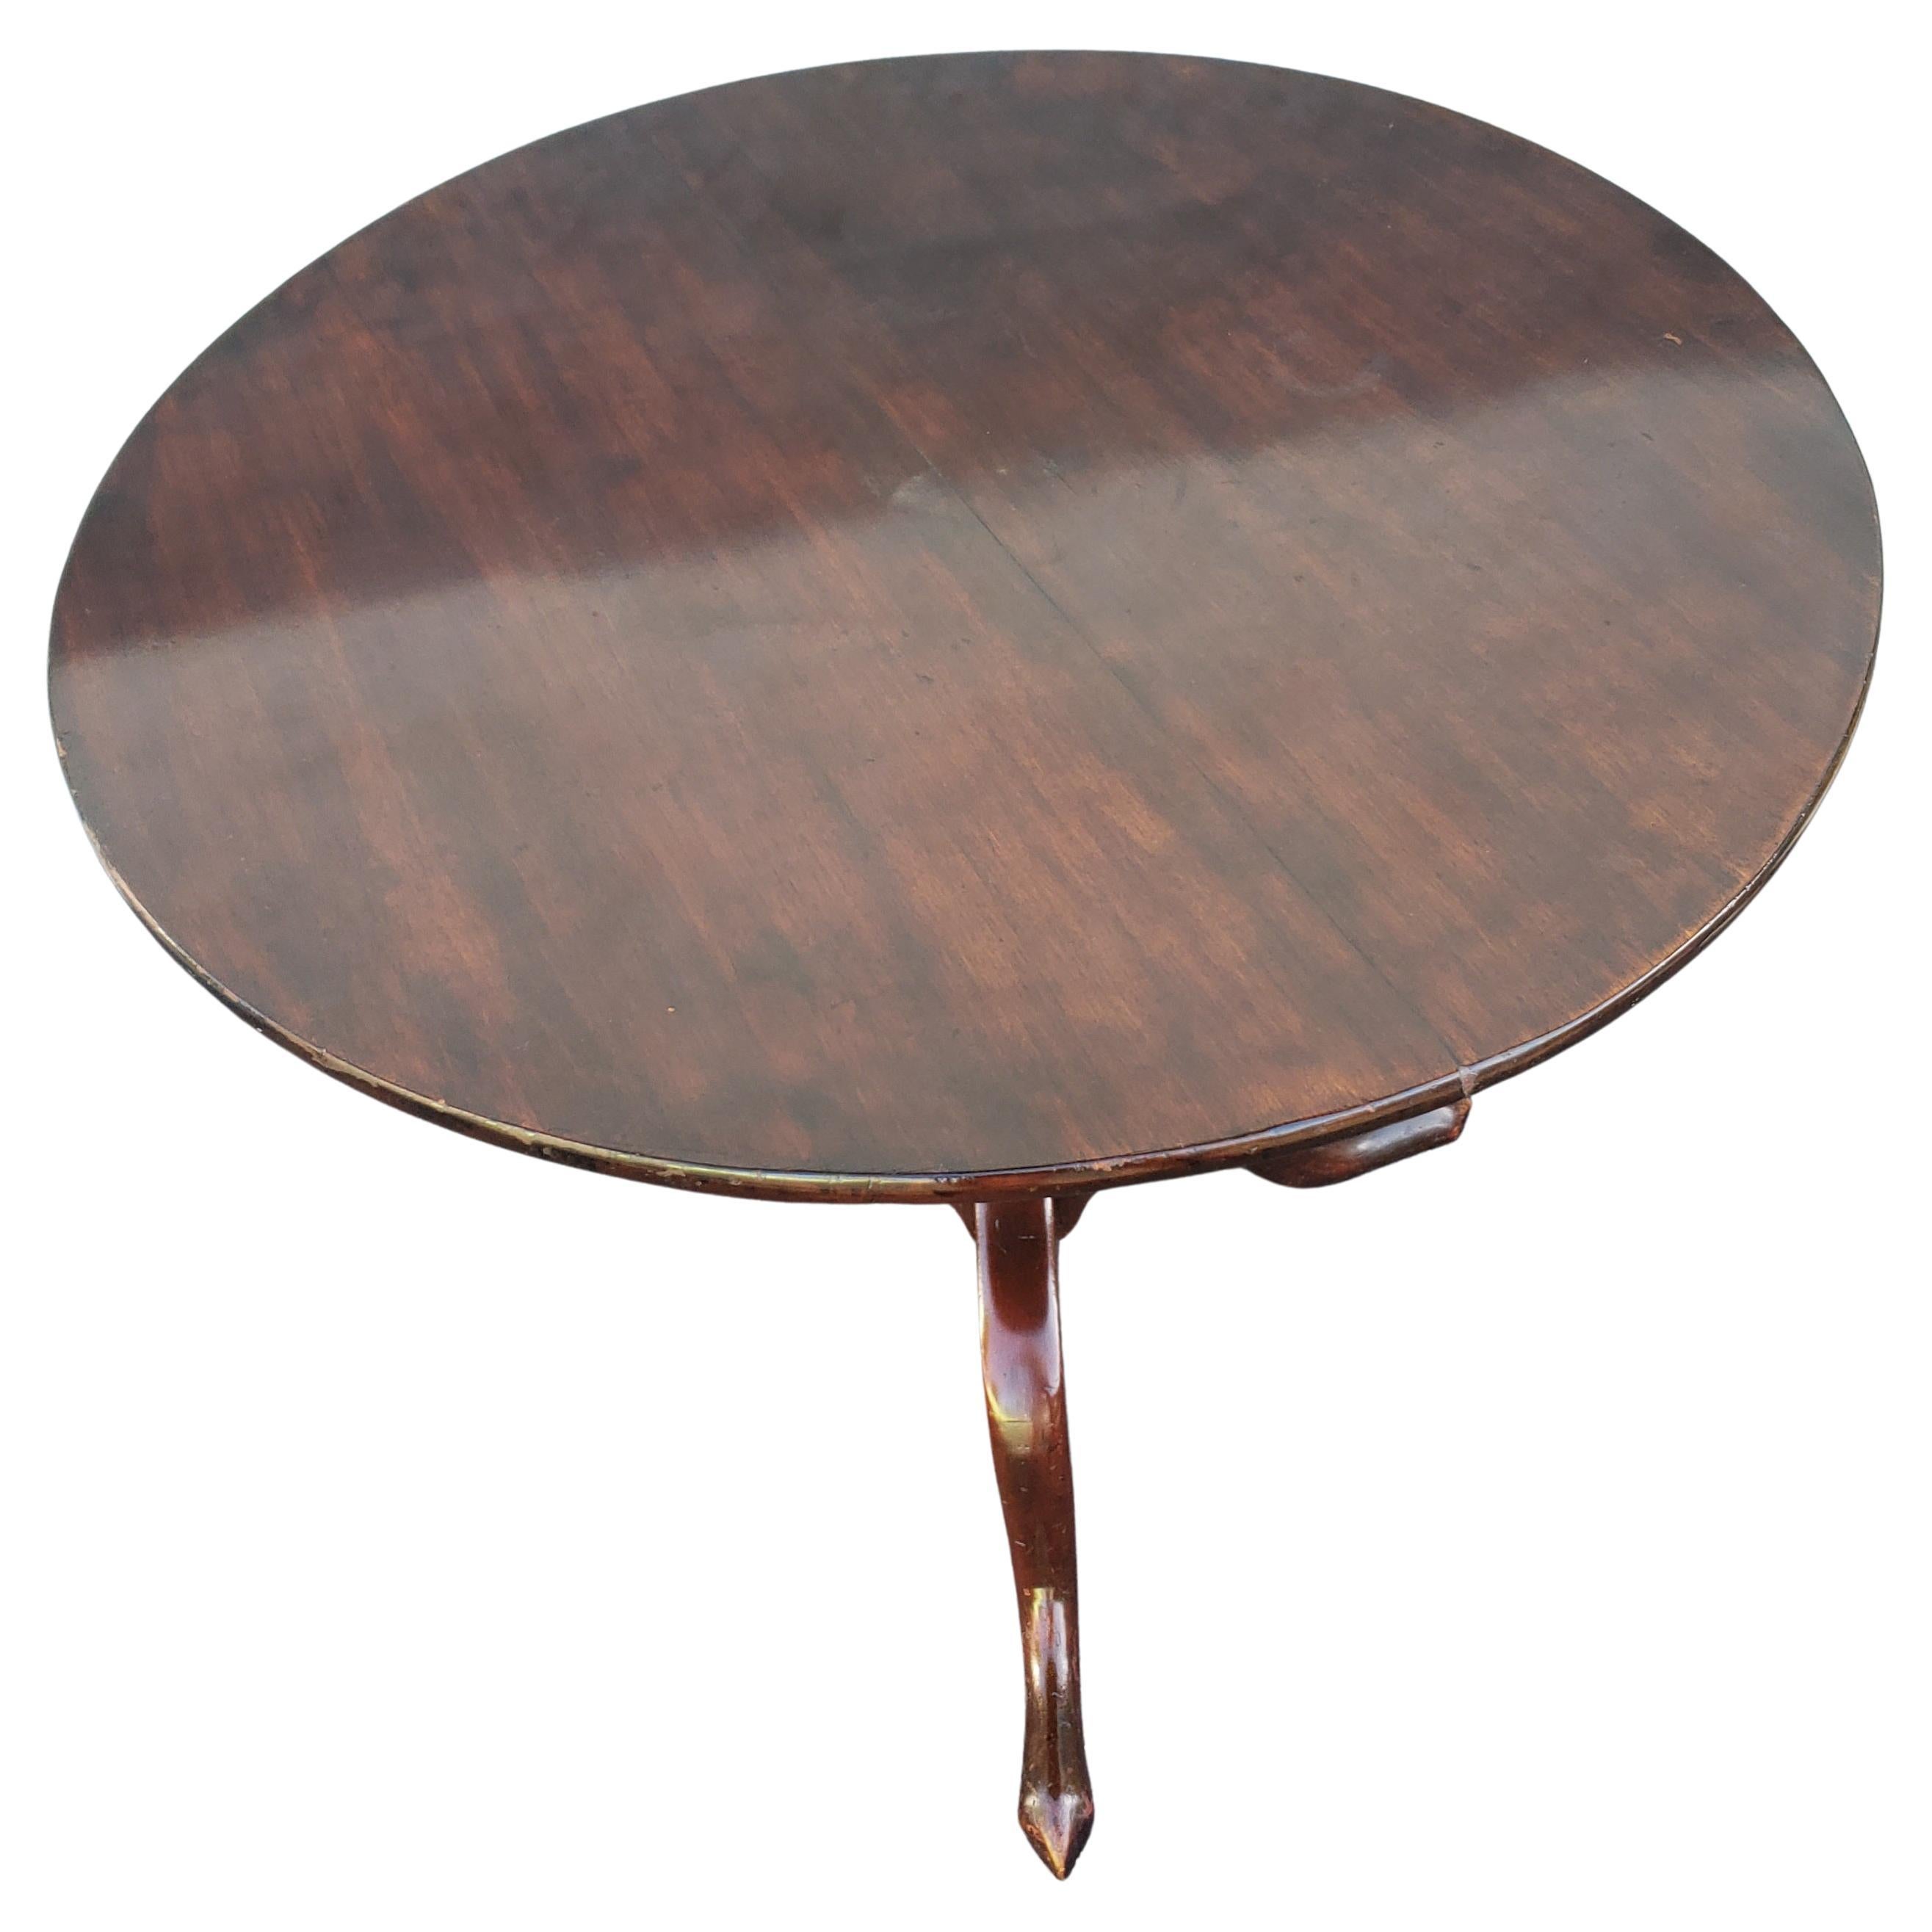 English mahogany one board tilt top tea table, dessert table. Come with its original banjo locking mechanism. Pedestal with turned ringed spiral and terminating on tripod legs with slipper pad feet, Mid 18th Century. Measures 32